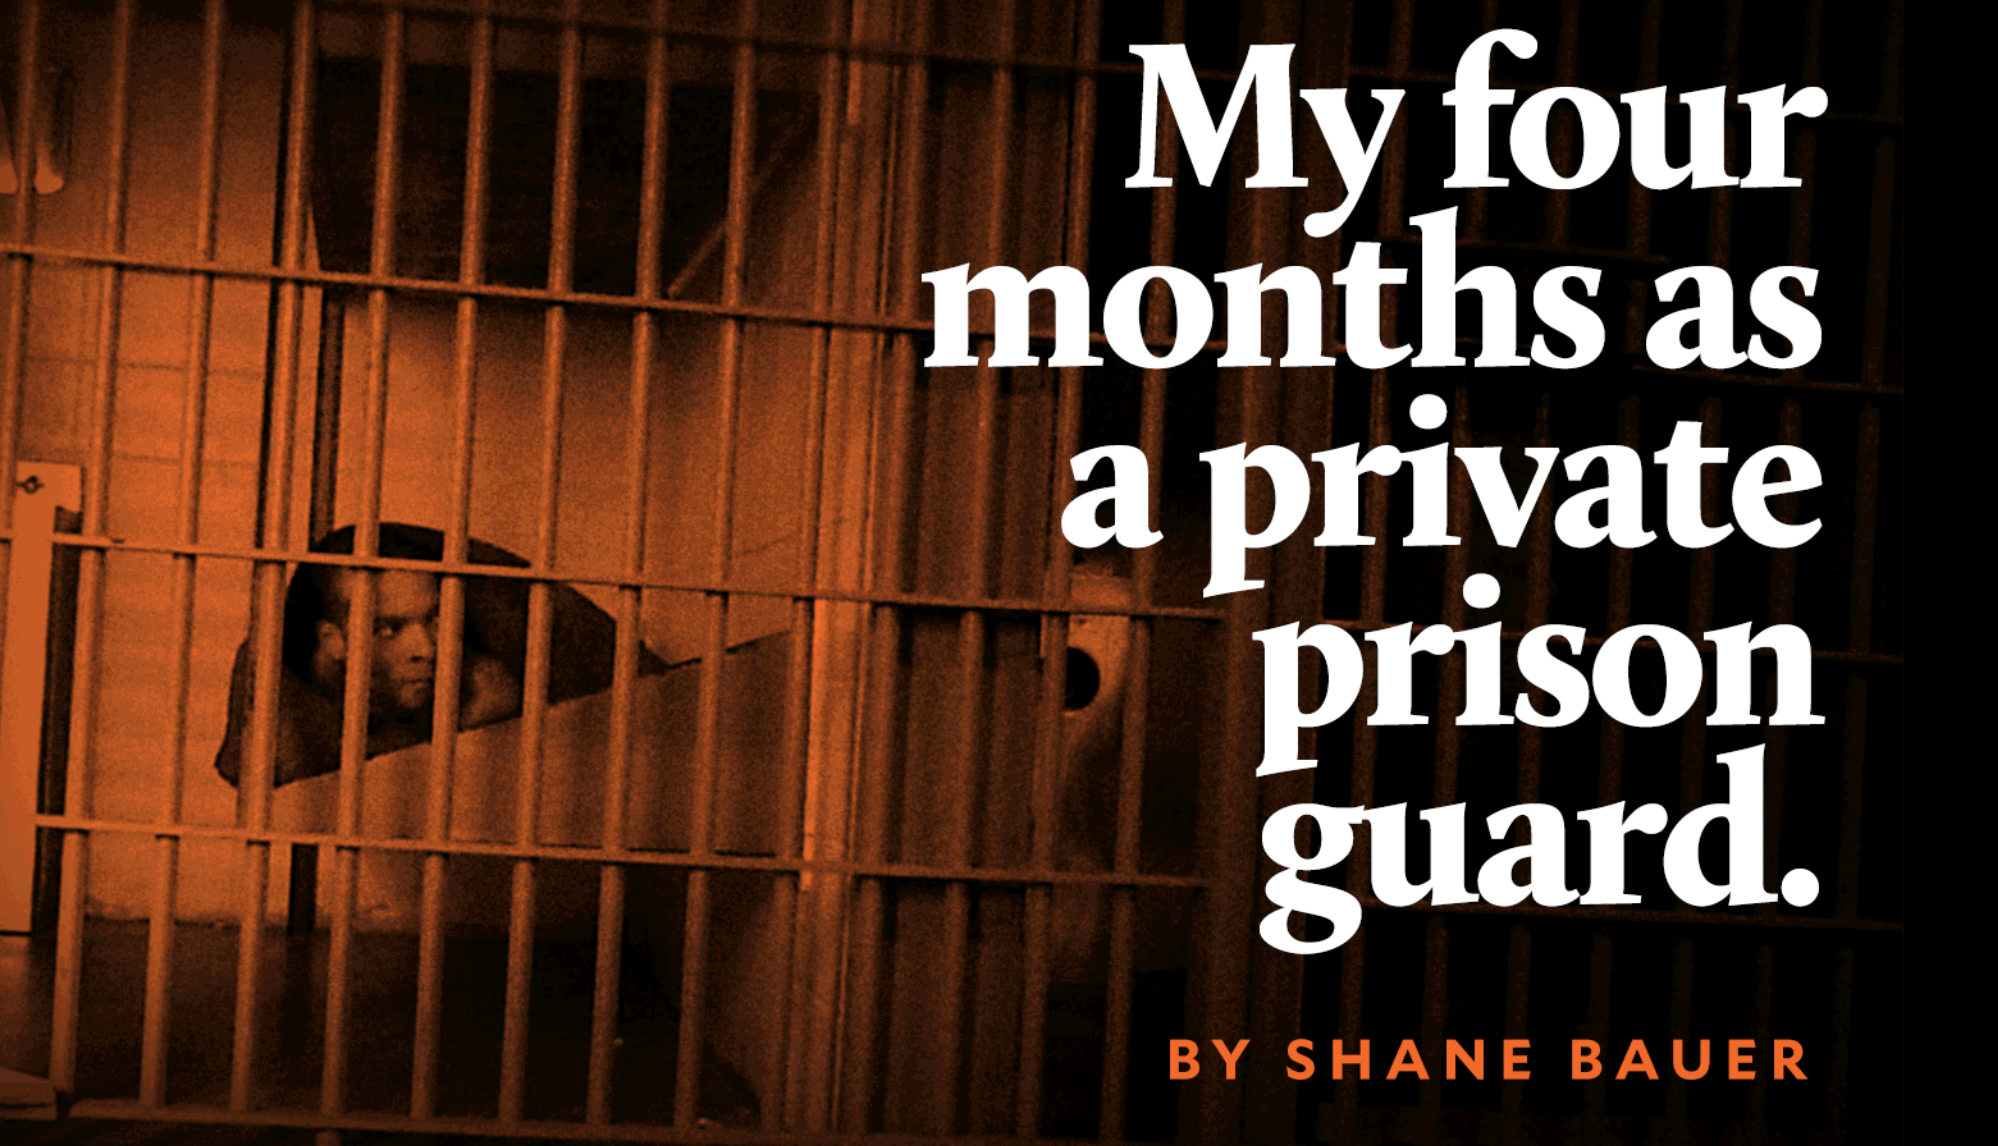 My Four Months as a prison guard (Credit: Mother Jones)